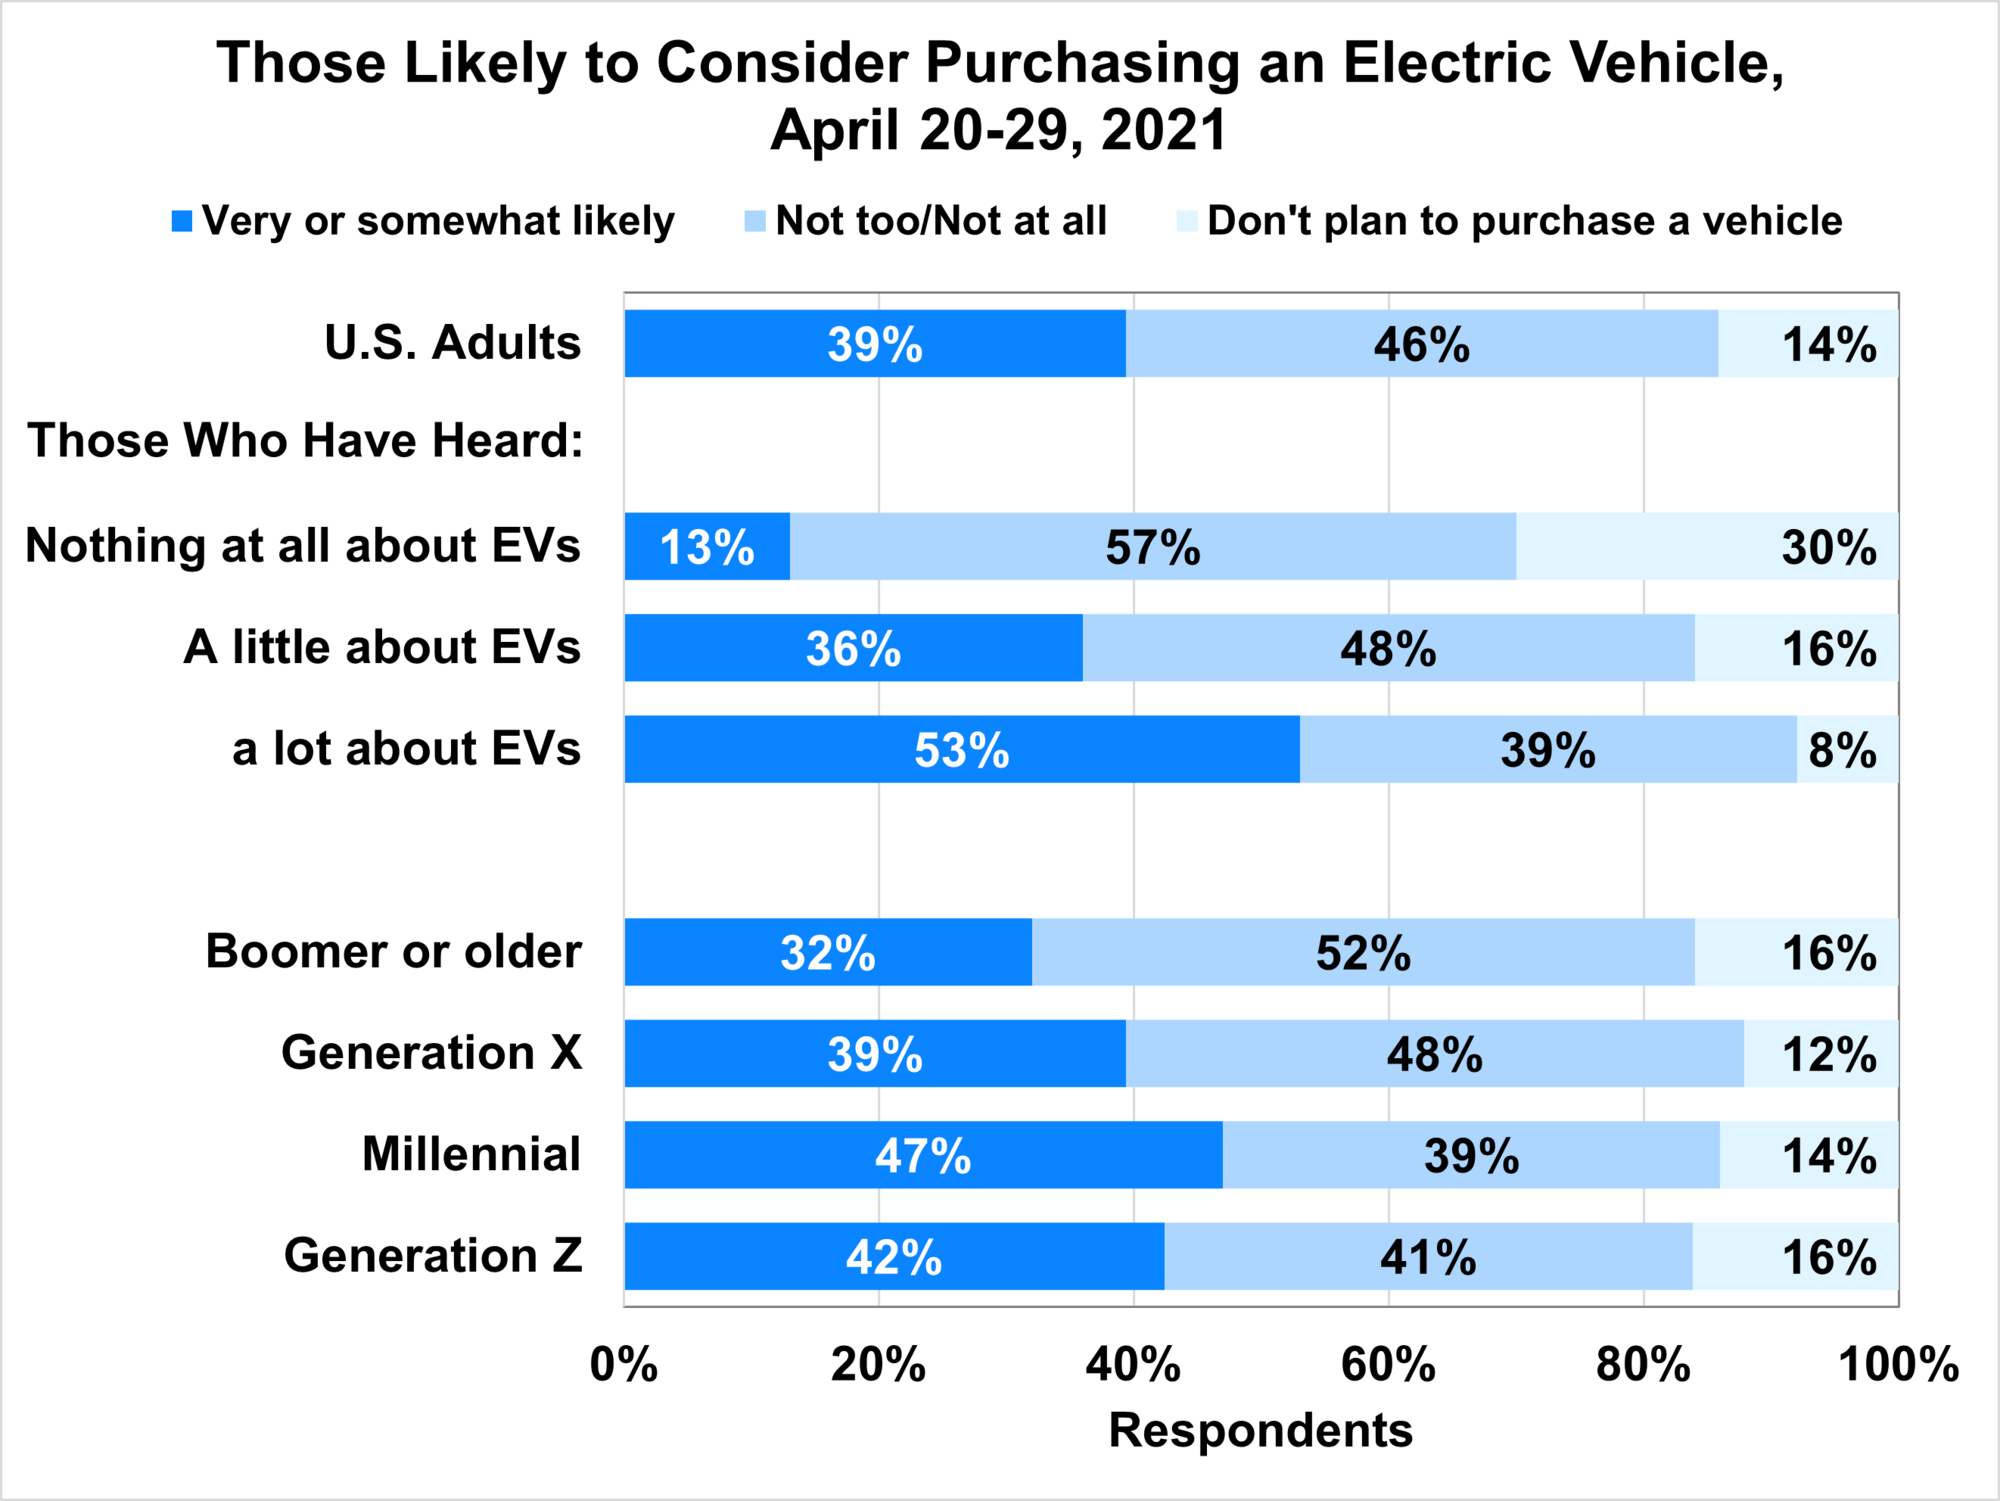 Those Likely to Consider Purchasing an Electric Vehicle, April 20-29, 2021